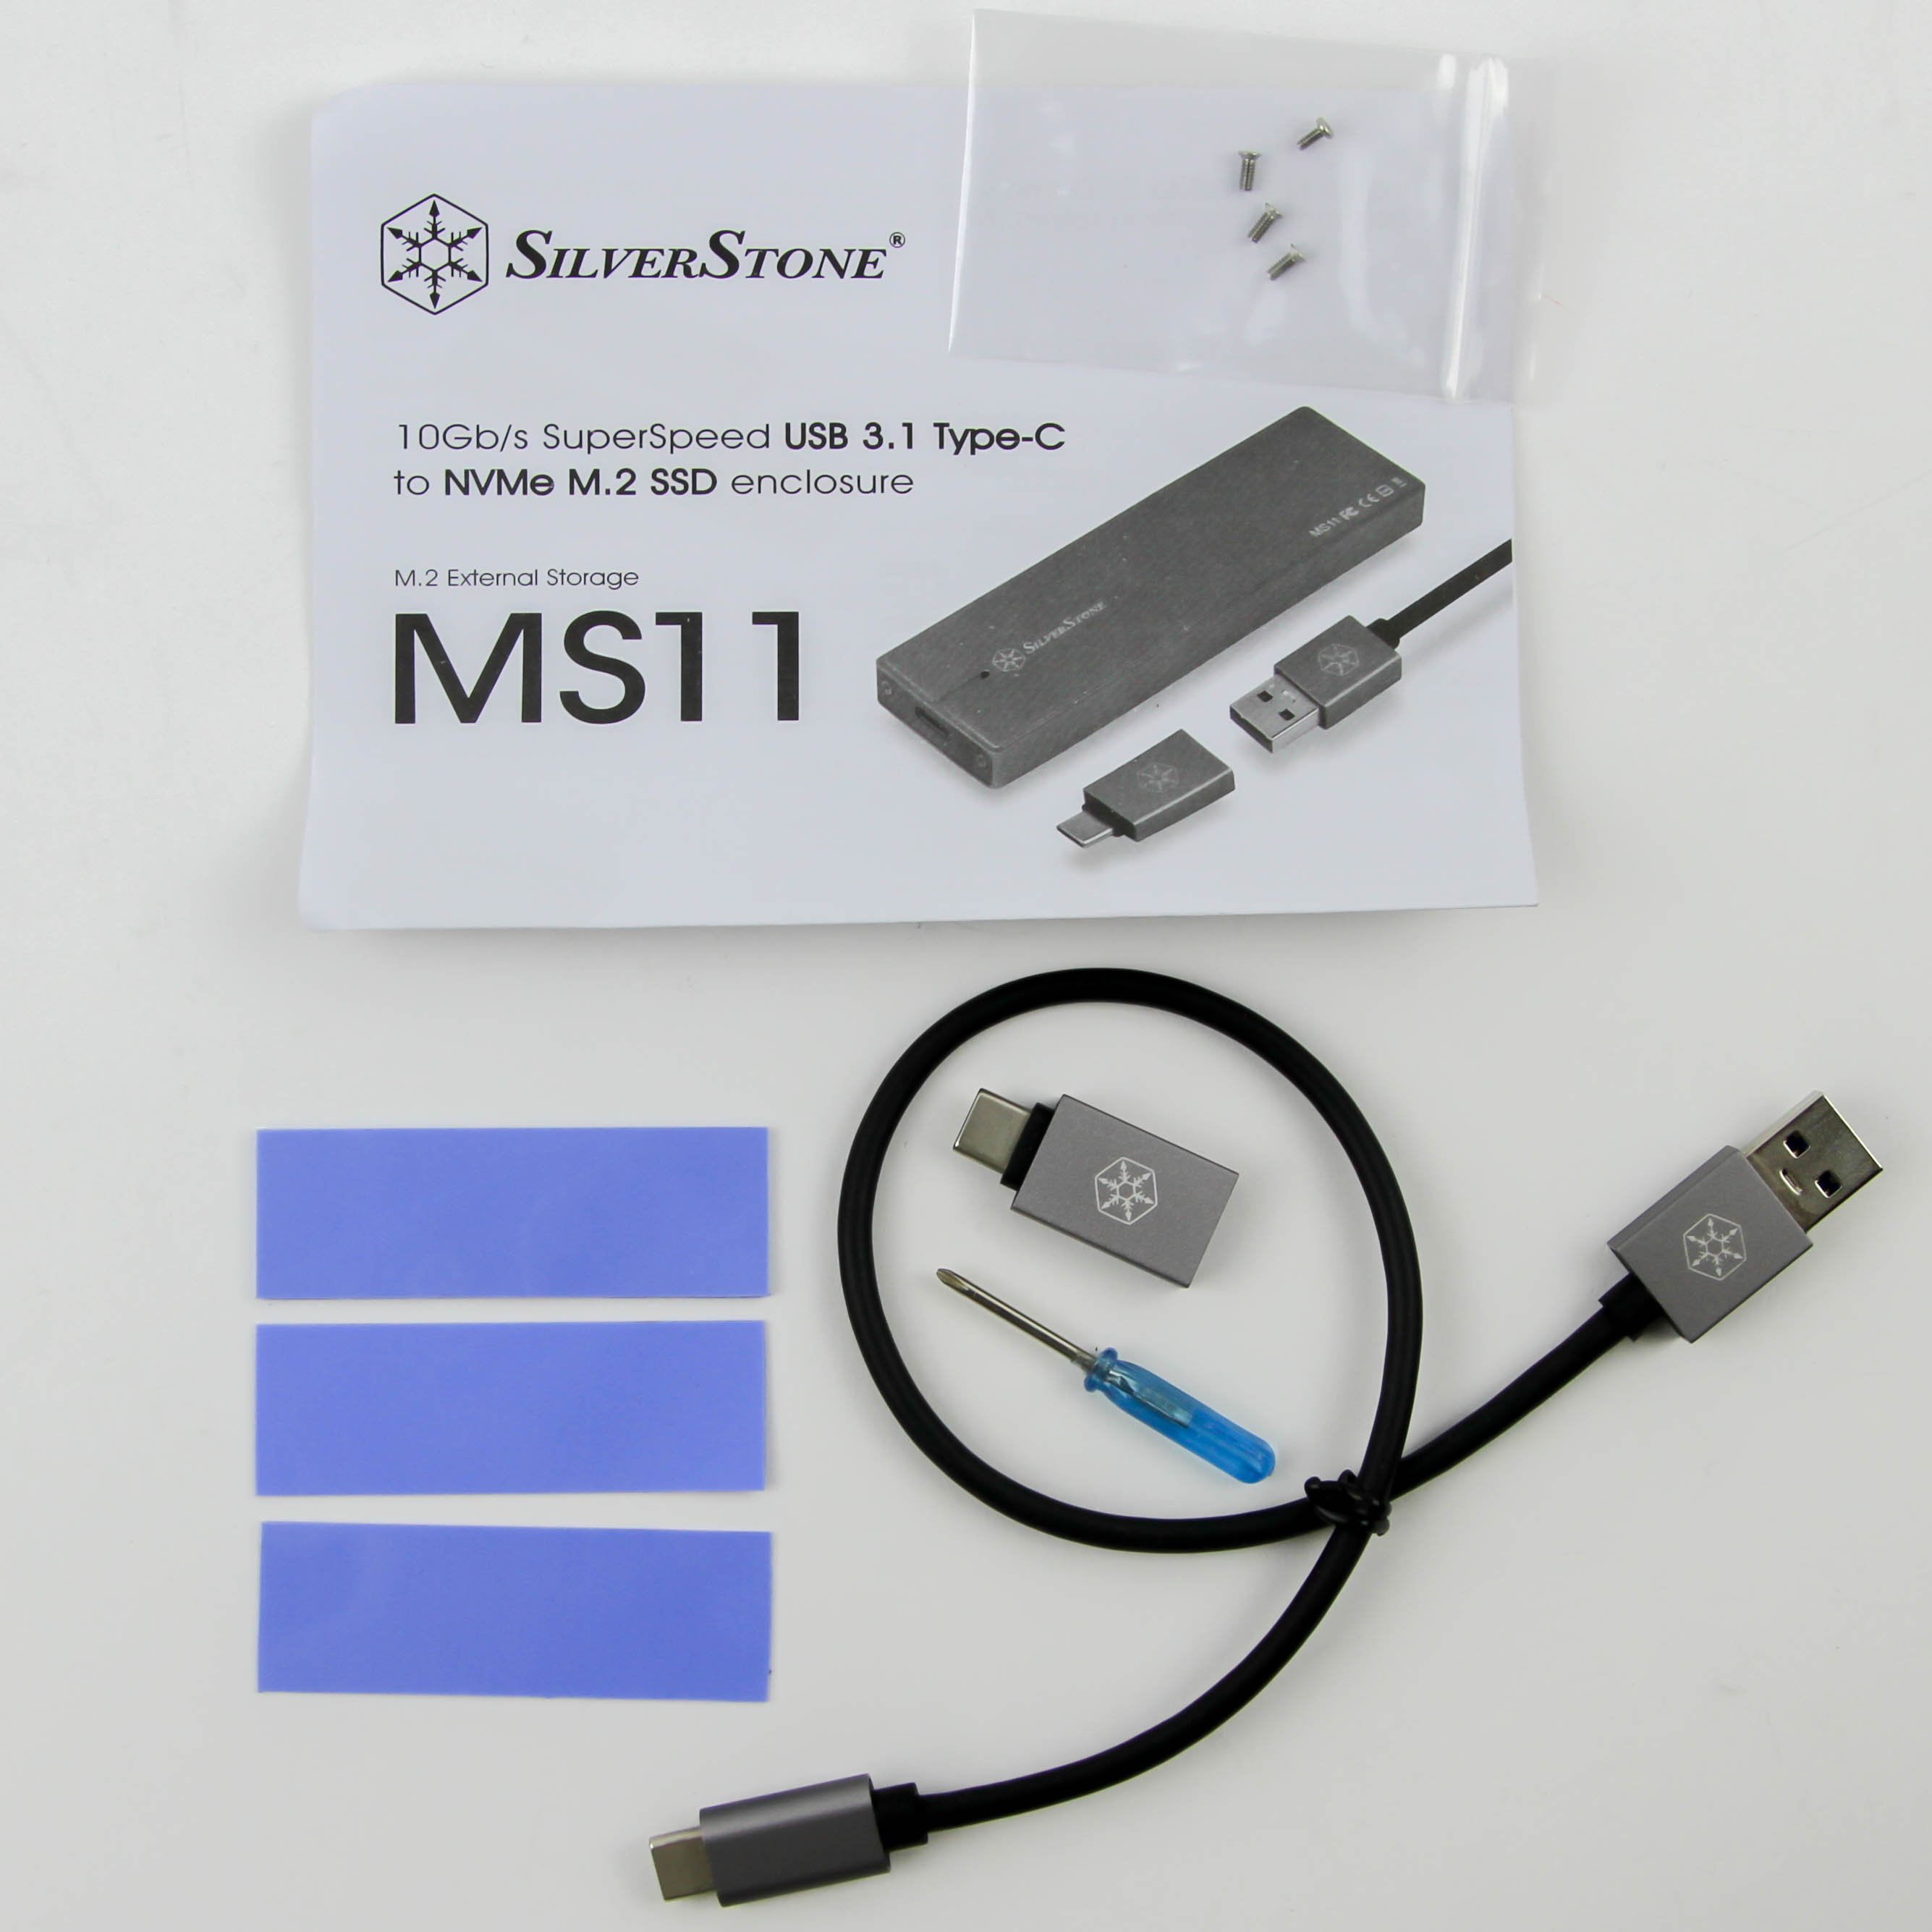 Portable Encrypted Storage for the USB Interface - Kingston KC2000 